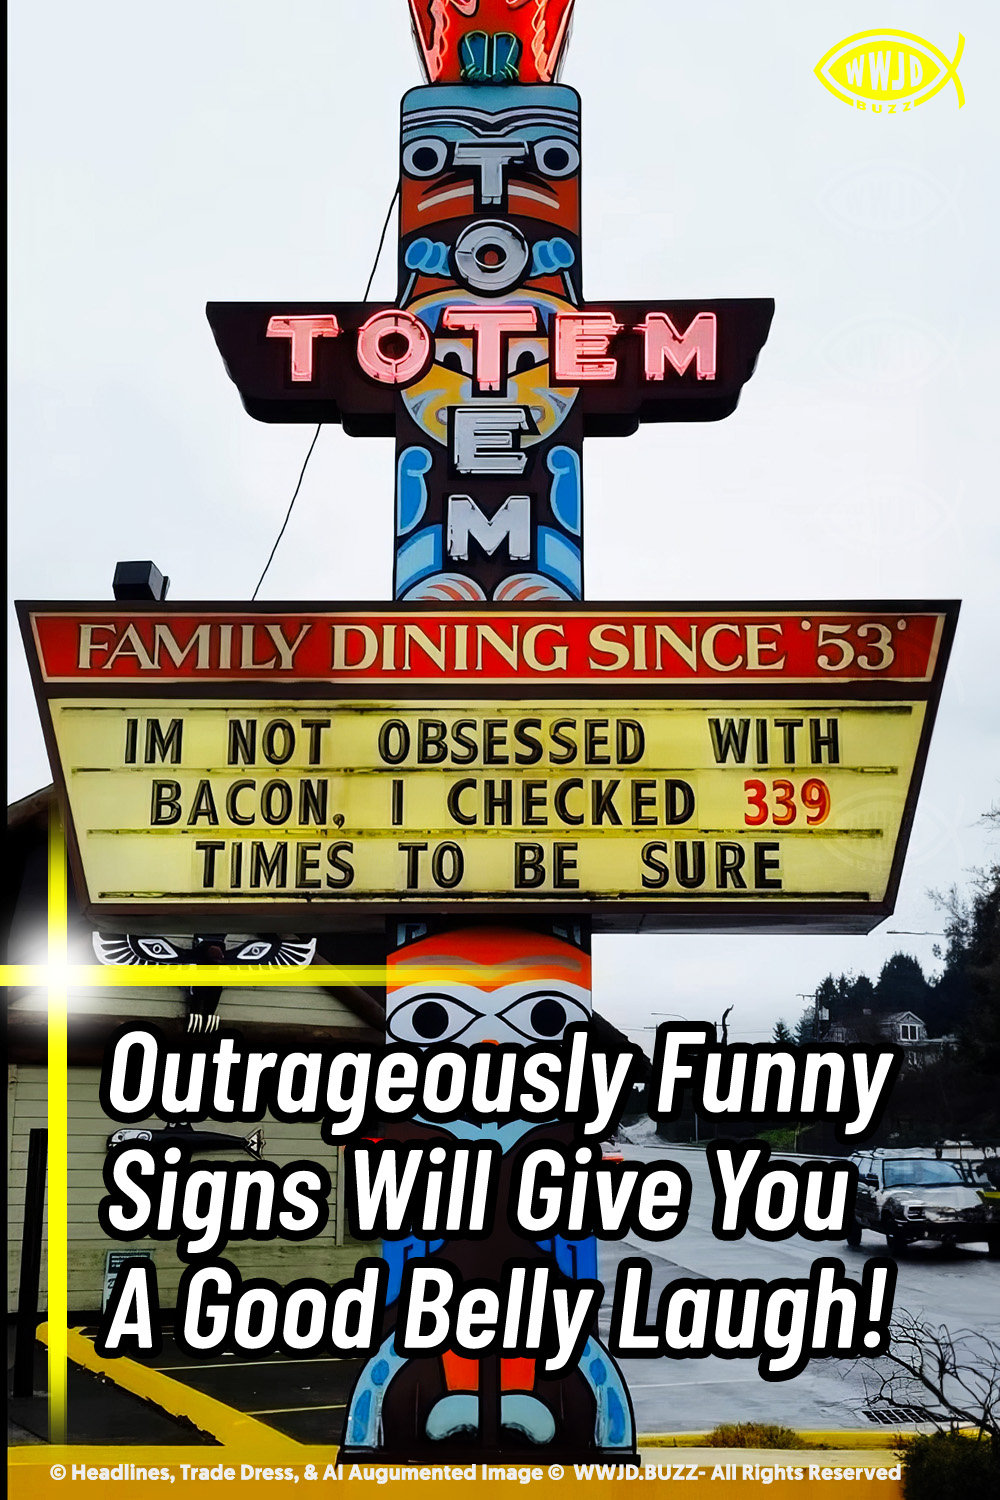 Get Ready To Belly Laugh at These 40 Outrageously Funny Signs